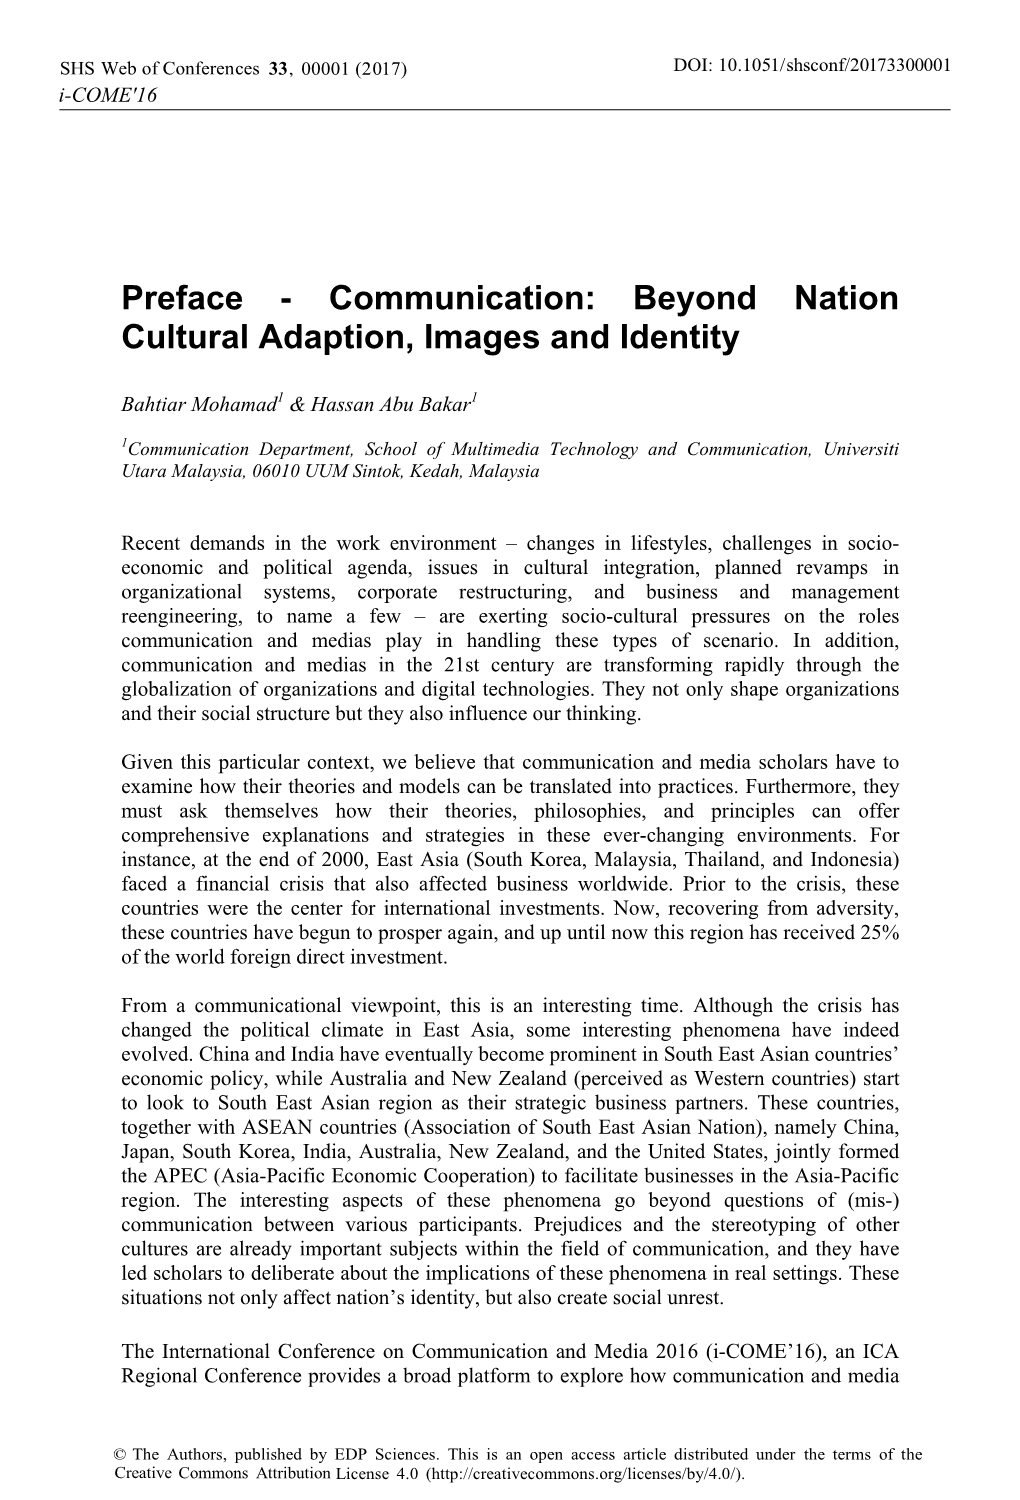 Preface - Communication: Beyond Nation Cultural Adaption, Images and Identity